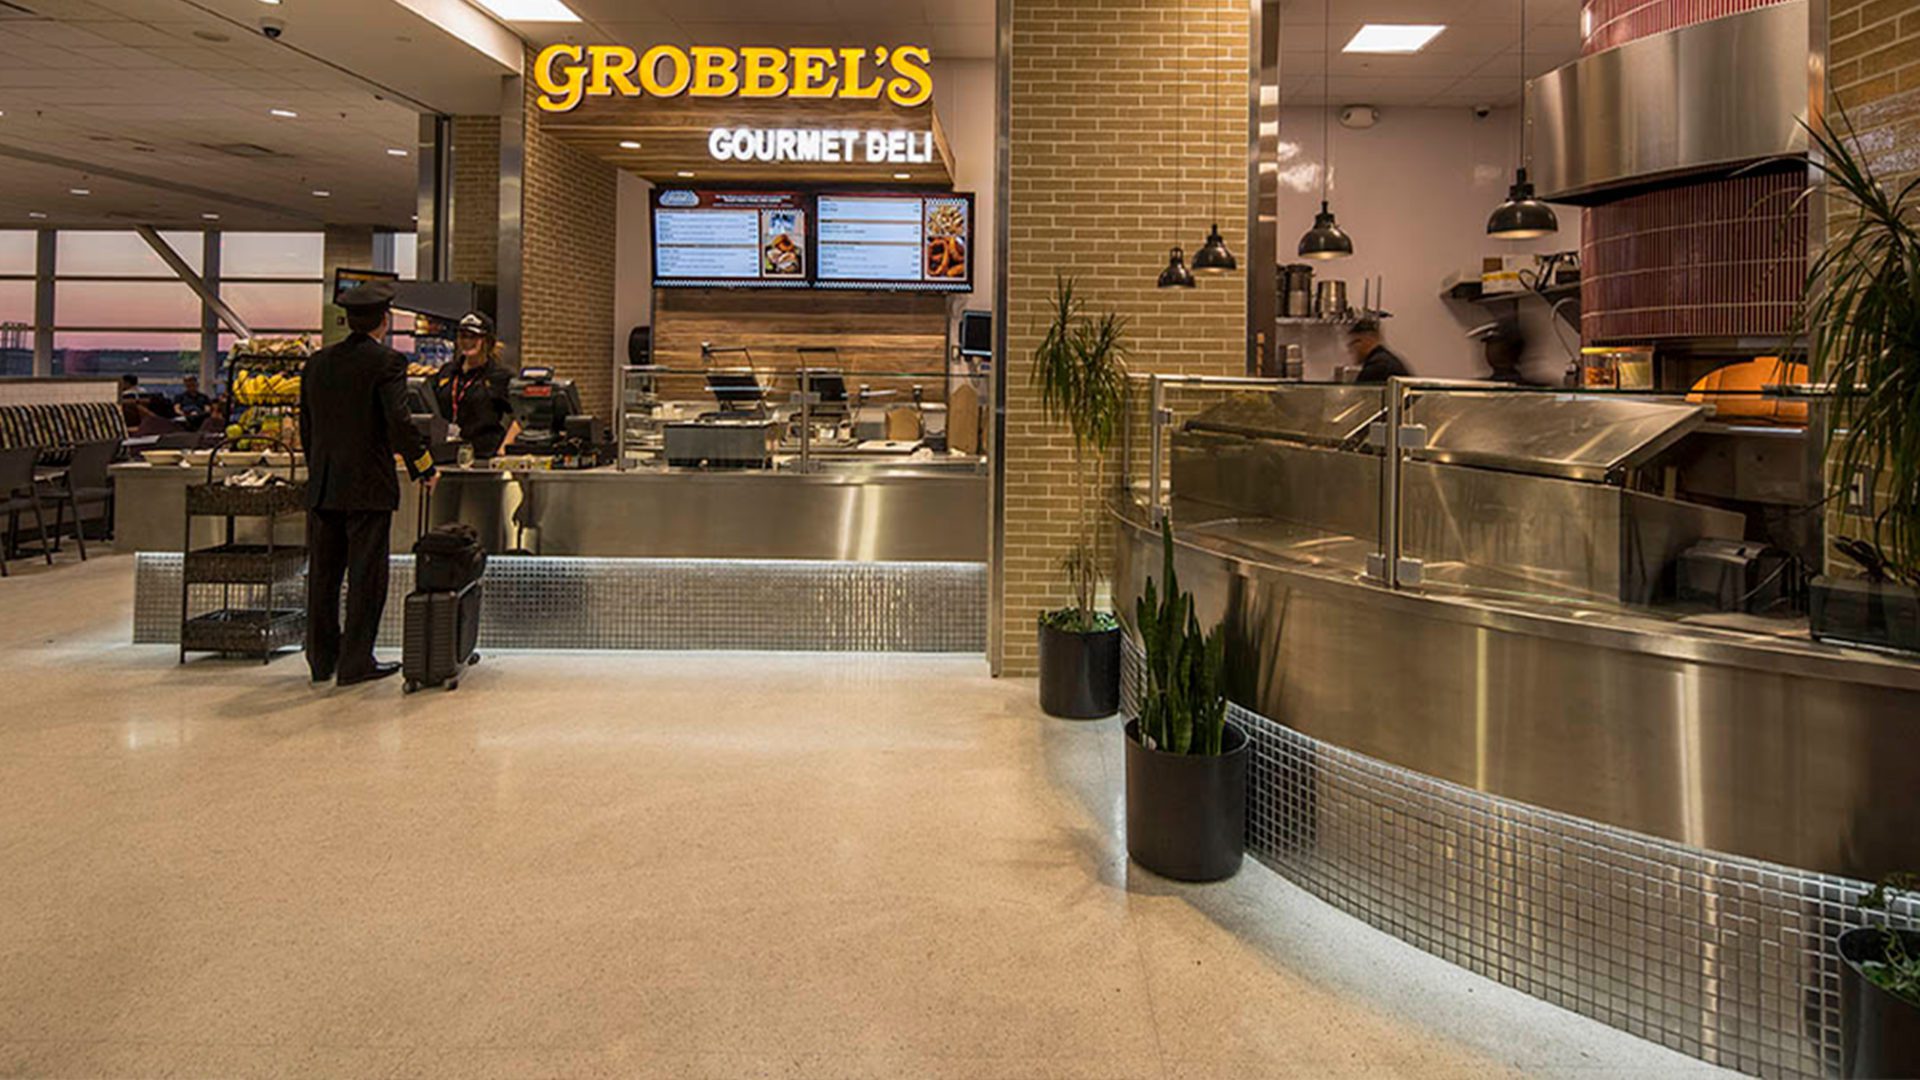 view of deli counter at Eastern Market @ DTW. sign reads "grobbel's gourmet deli"